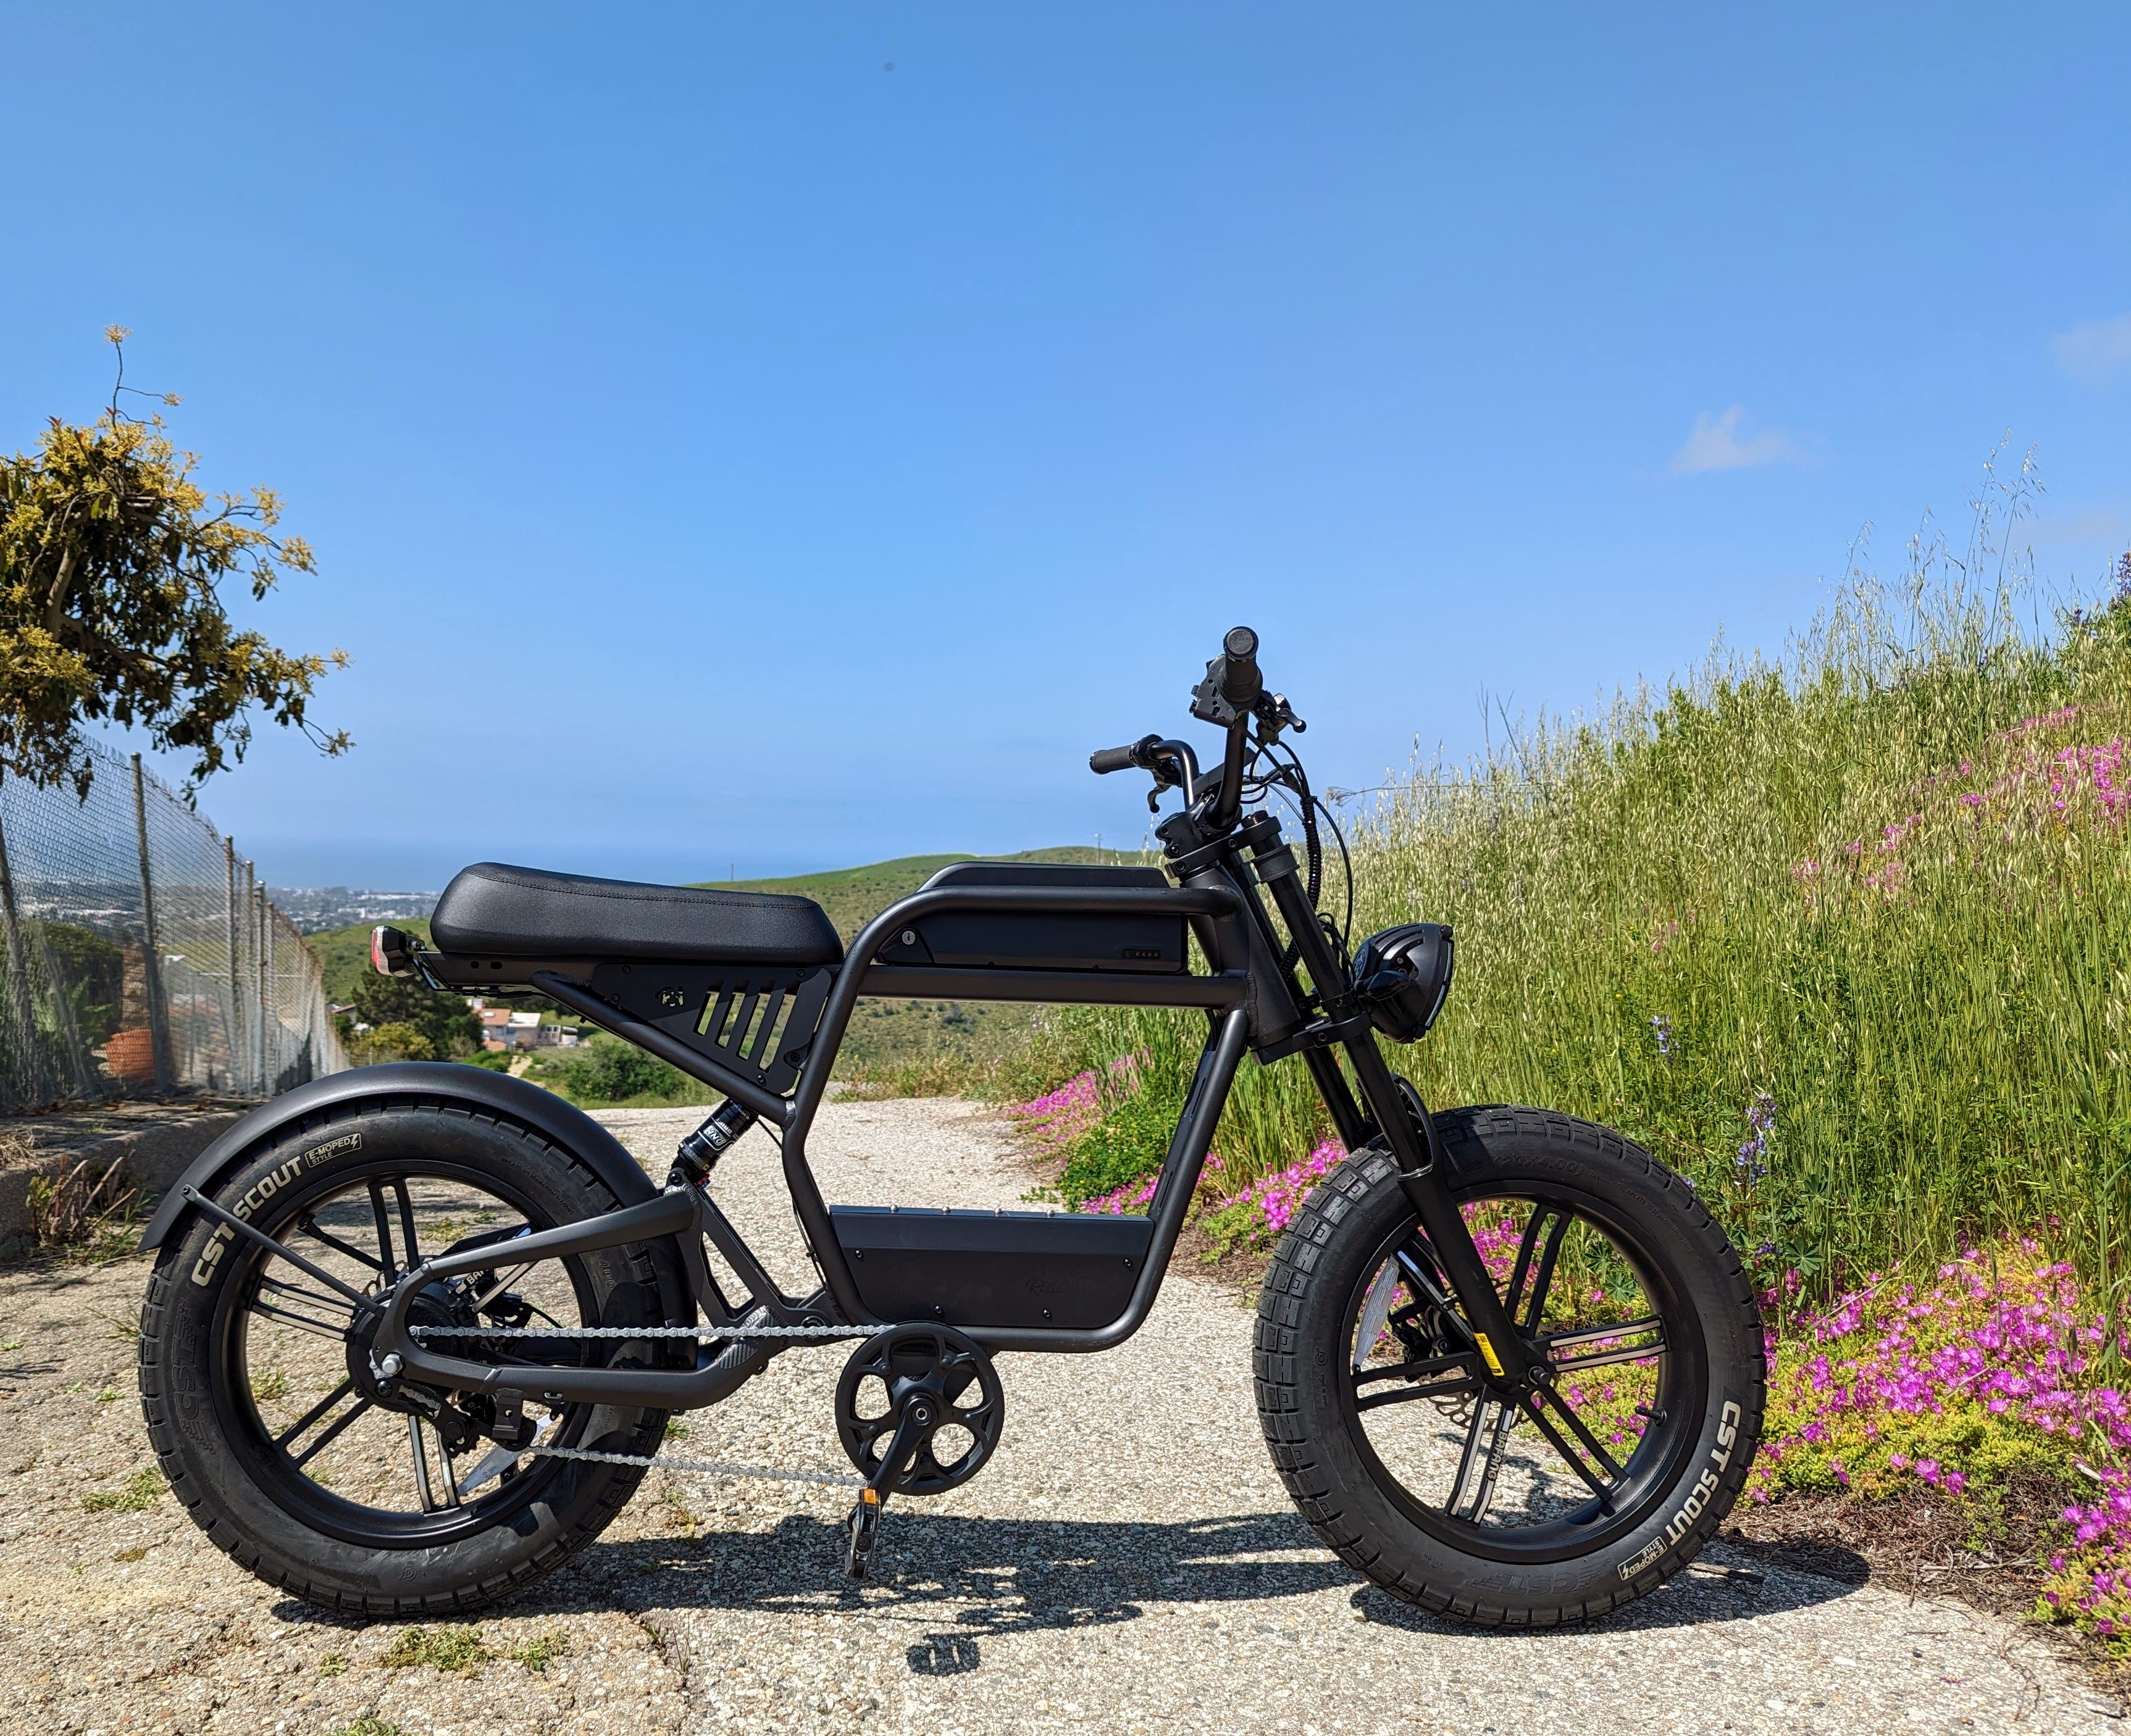 CleanTechnica Tested: The Ride1Up Revv1 Moped E-Bike - CleanTechnica